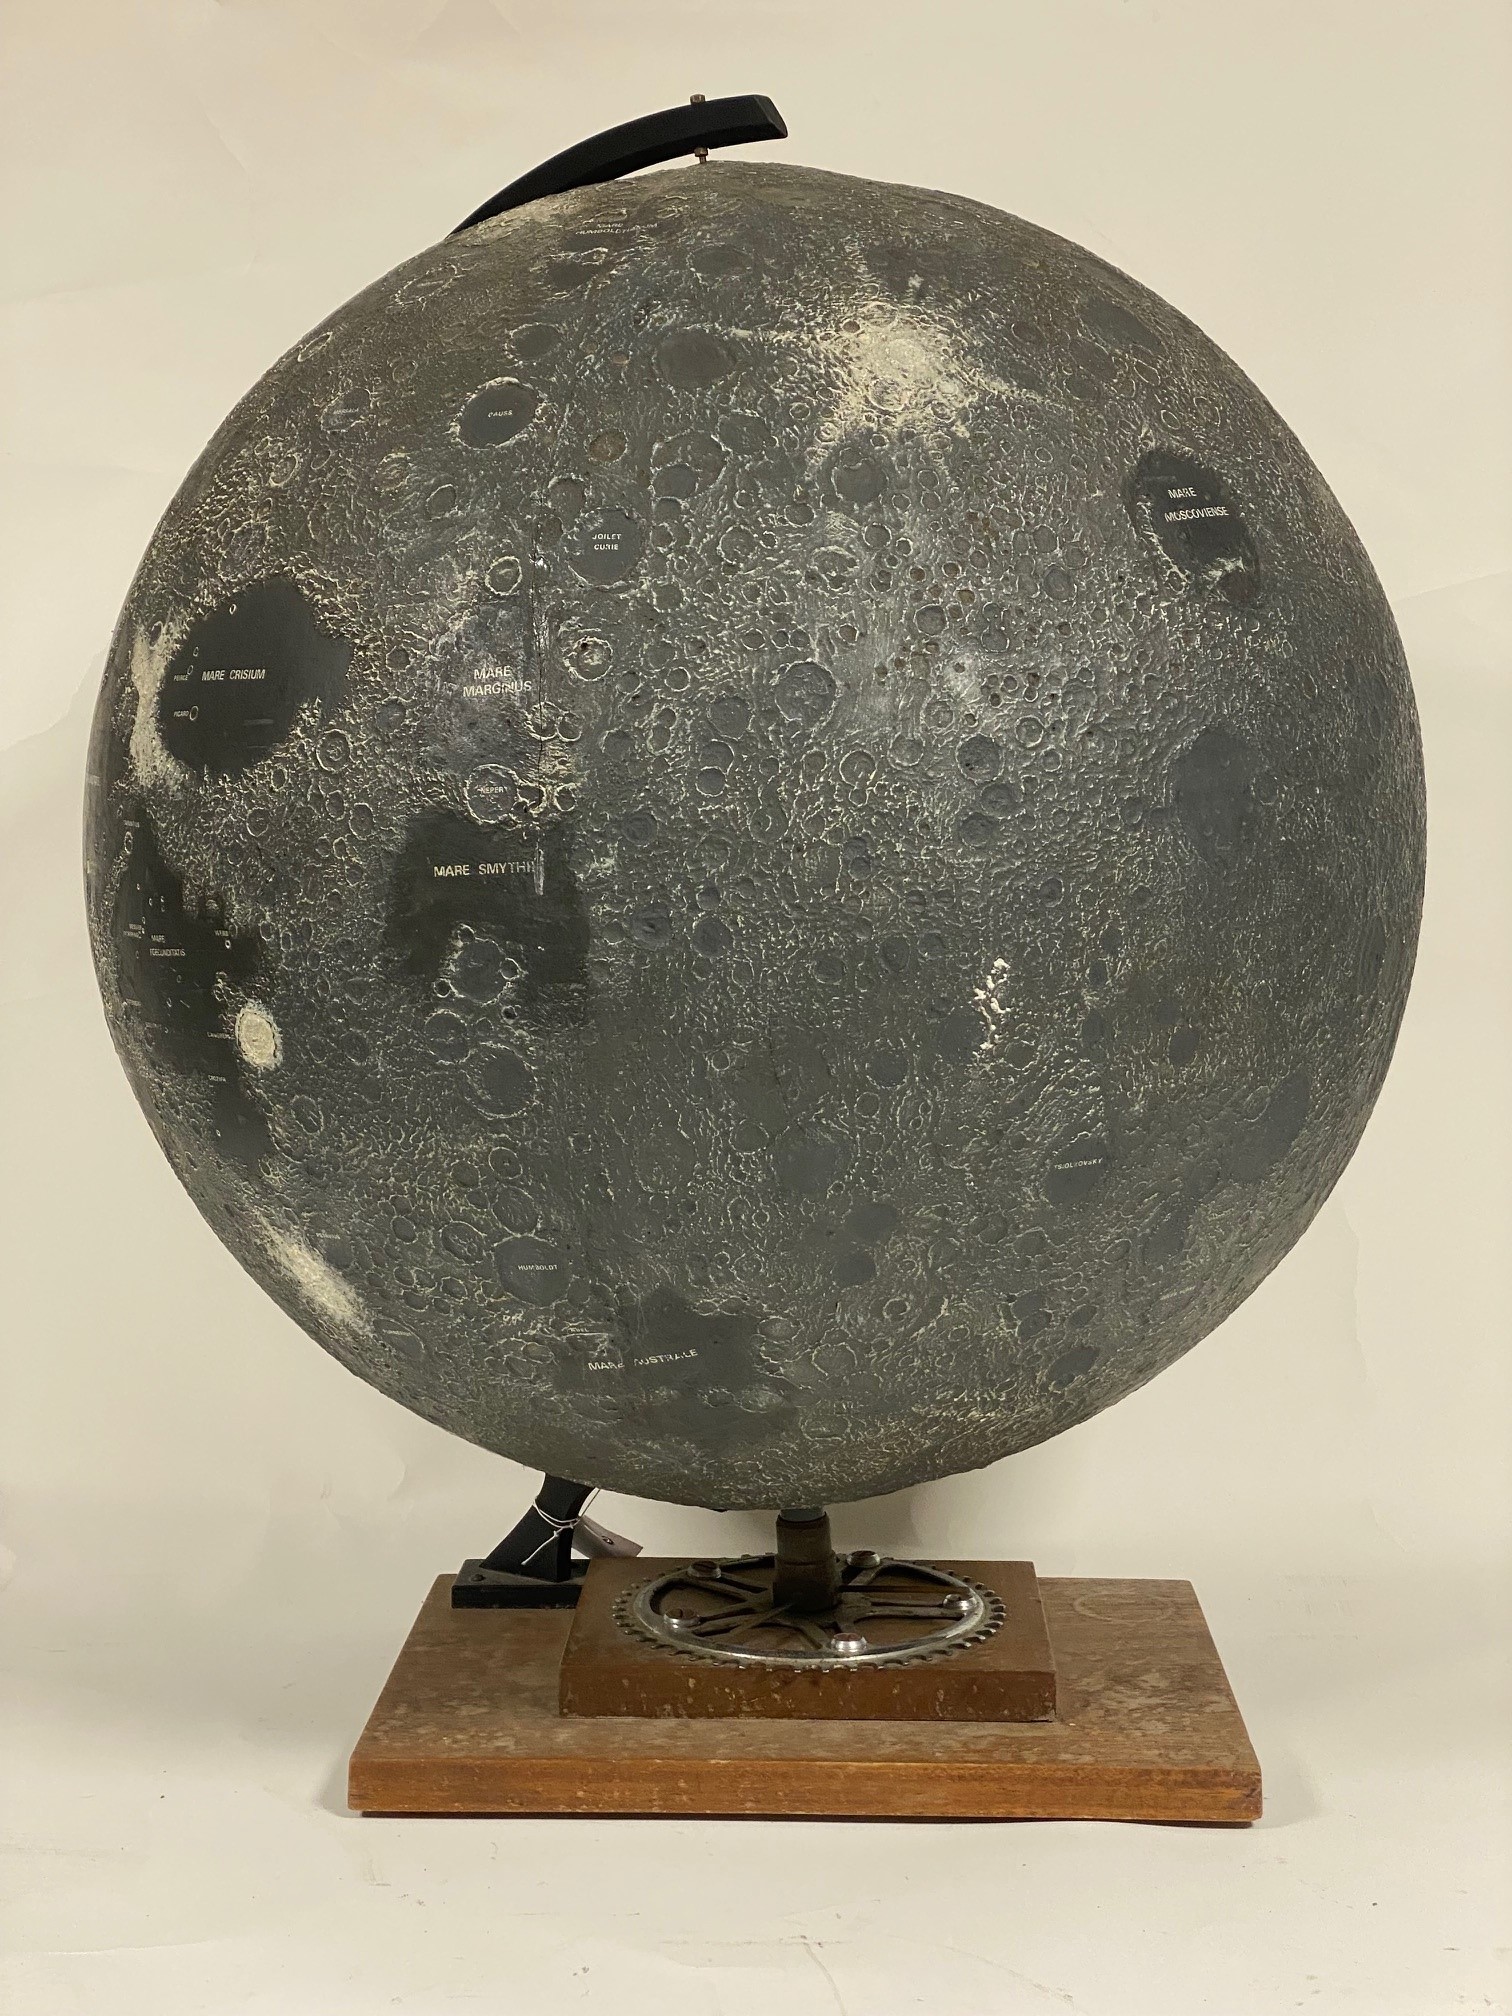 A rare large (24 inch) three-dimensional topographical lunar globe, c.1969, believed to be by Arthur